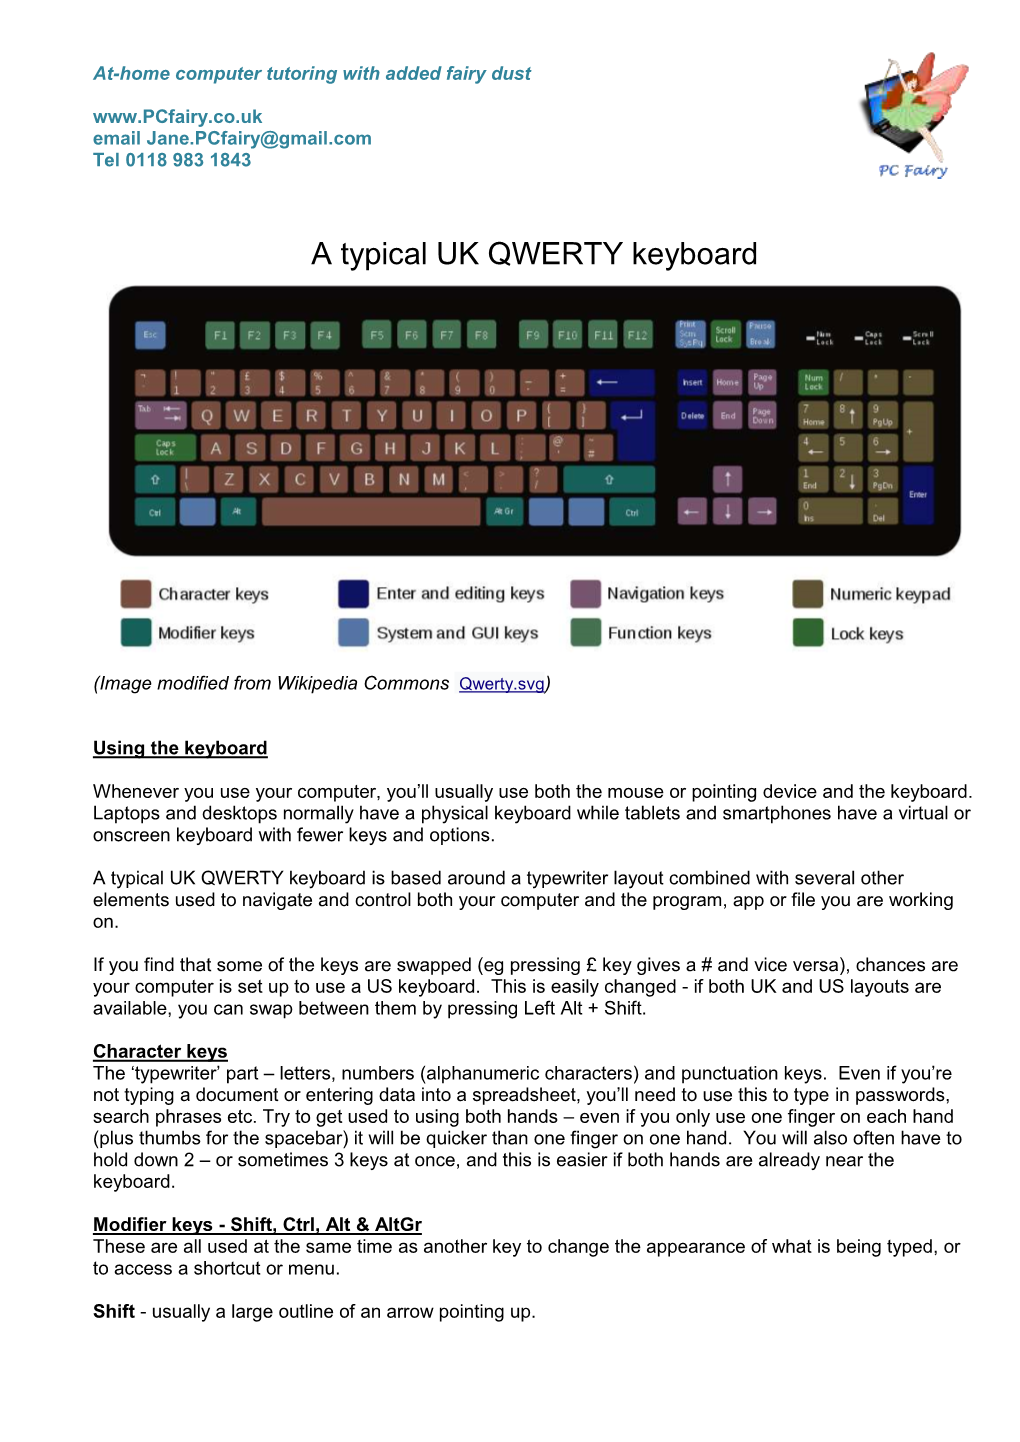 A Typical UK QWERTY Keyboard